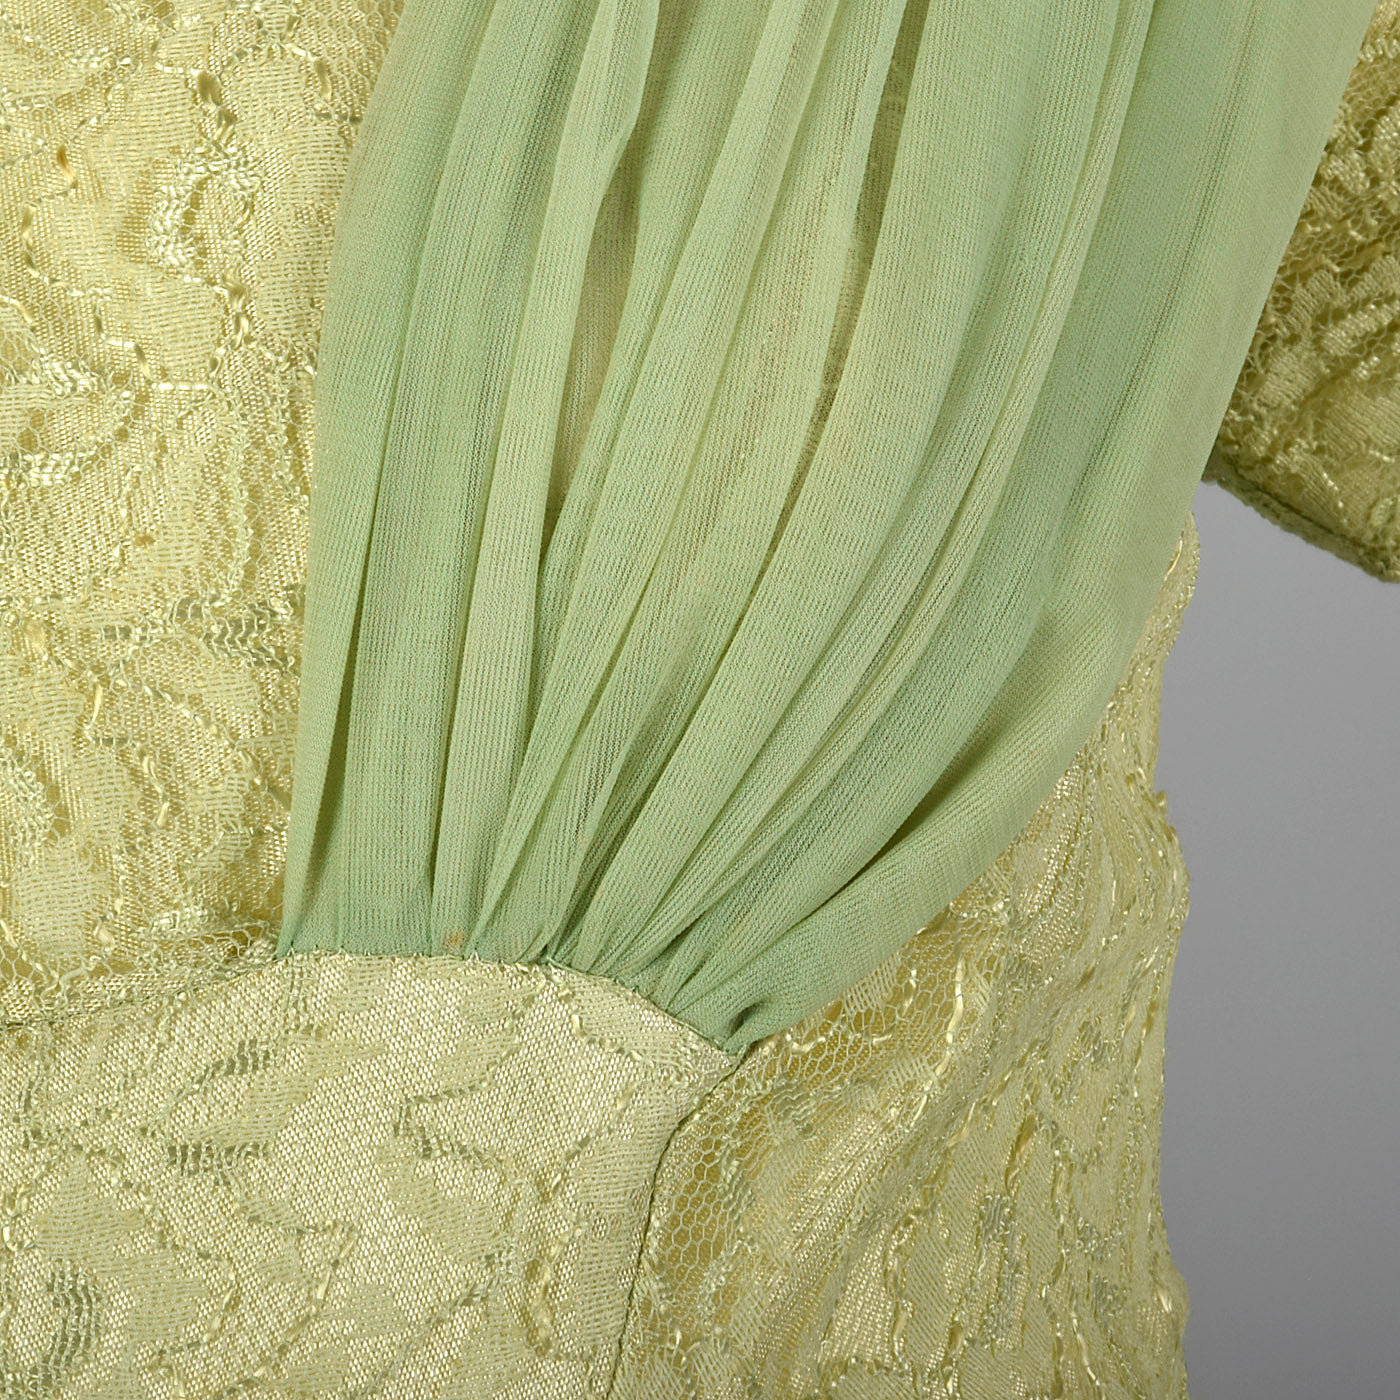 1950s Green Lace Evening Dress